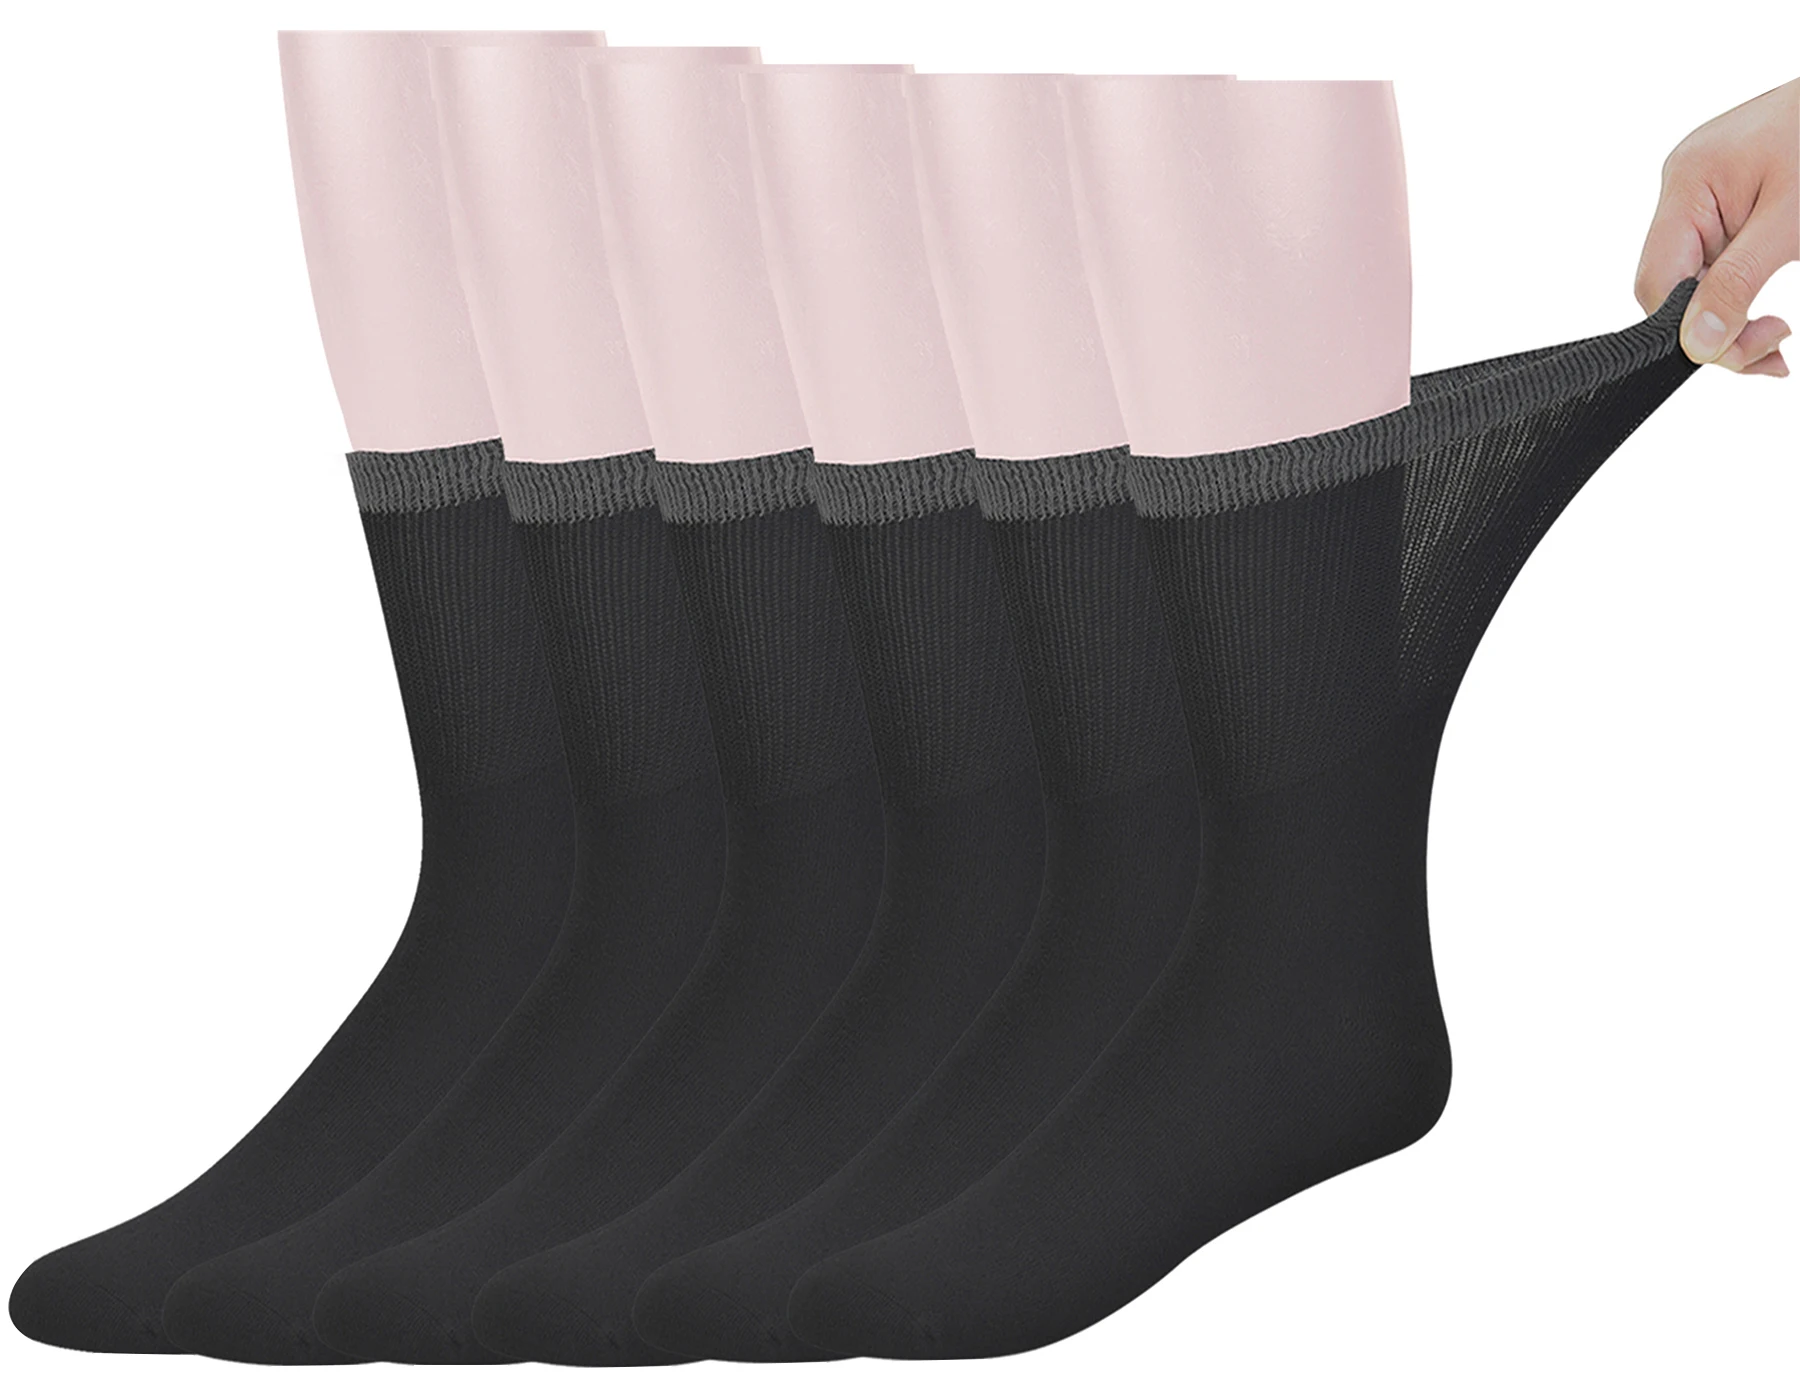 

Best Mens Bamboo Mid-Calf Diabetic Socks With Seamless Toe,6 Pairs L Size(Socks Size:10-13)